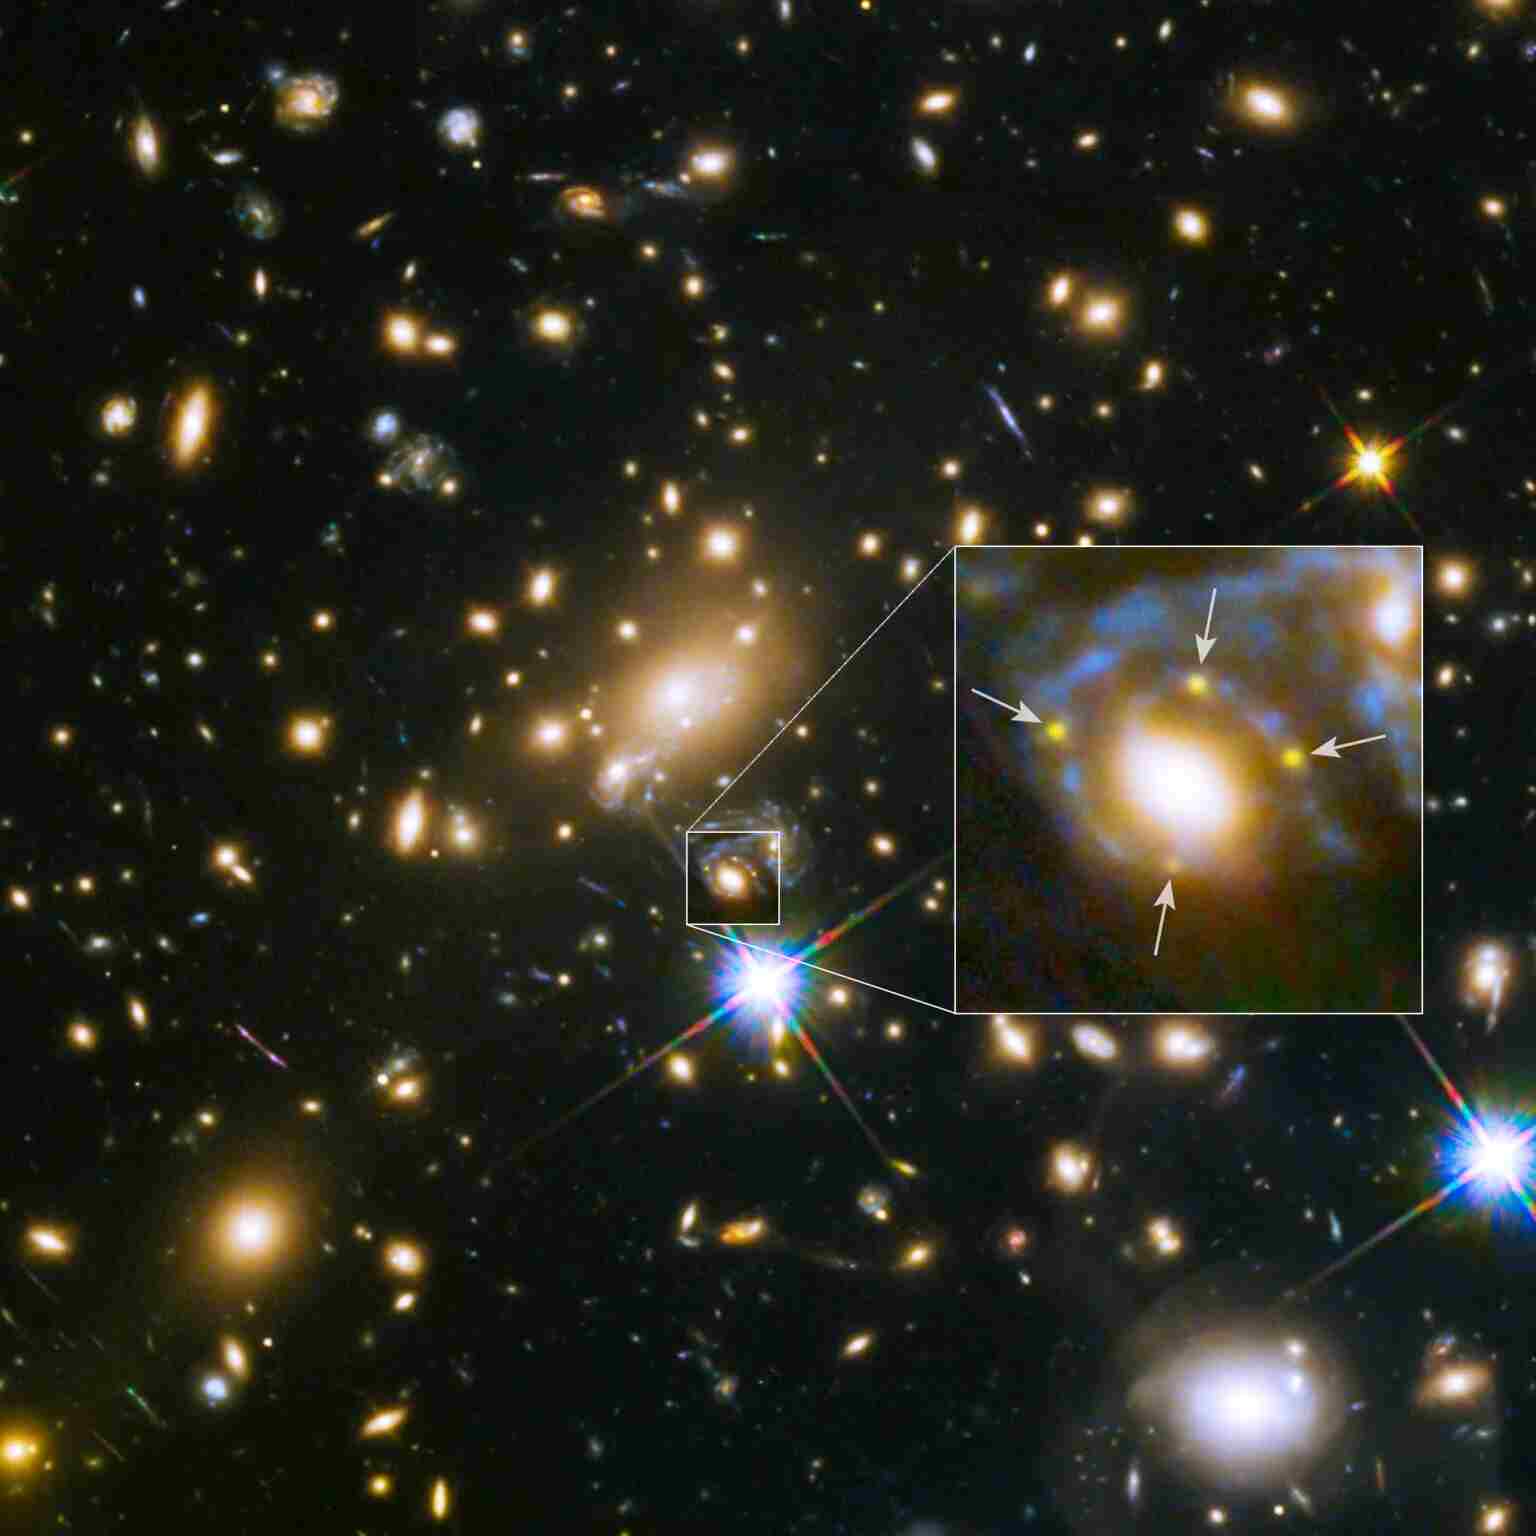 This image, captured by the Hubble Space Telescope, displays a galaxy's powerful gravity embedded in a massive cluster of galaxies that forms multiple images of a single distant supernova behind it. The galaxy lies within a large cluster of galaxies called MACS  J1149.6+2223, which is more than 5 billion light-years away from Earth. In the zoomed-in view of the galaxy, the multiple copies of an exploding star named Supernova Refsdal are indicated by arrows. This supernova is located 9.3 billion light-years away from Earth. The image credit goes to NASA, ESA, and S. Rodney (JHU) and the FrontierSN team; T. Treu (UCLA), P. Kelly (UC Berkeley), and the GLASS team; J. Lotz (STScI) and the Frontier Fields team; M. Postman (STScI) and the CLASH team; and Z. Levay (STScI).